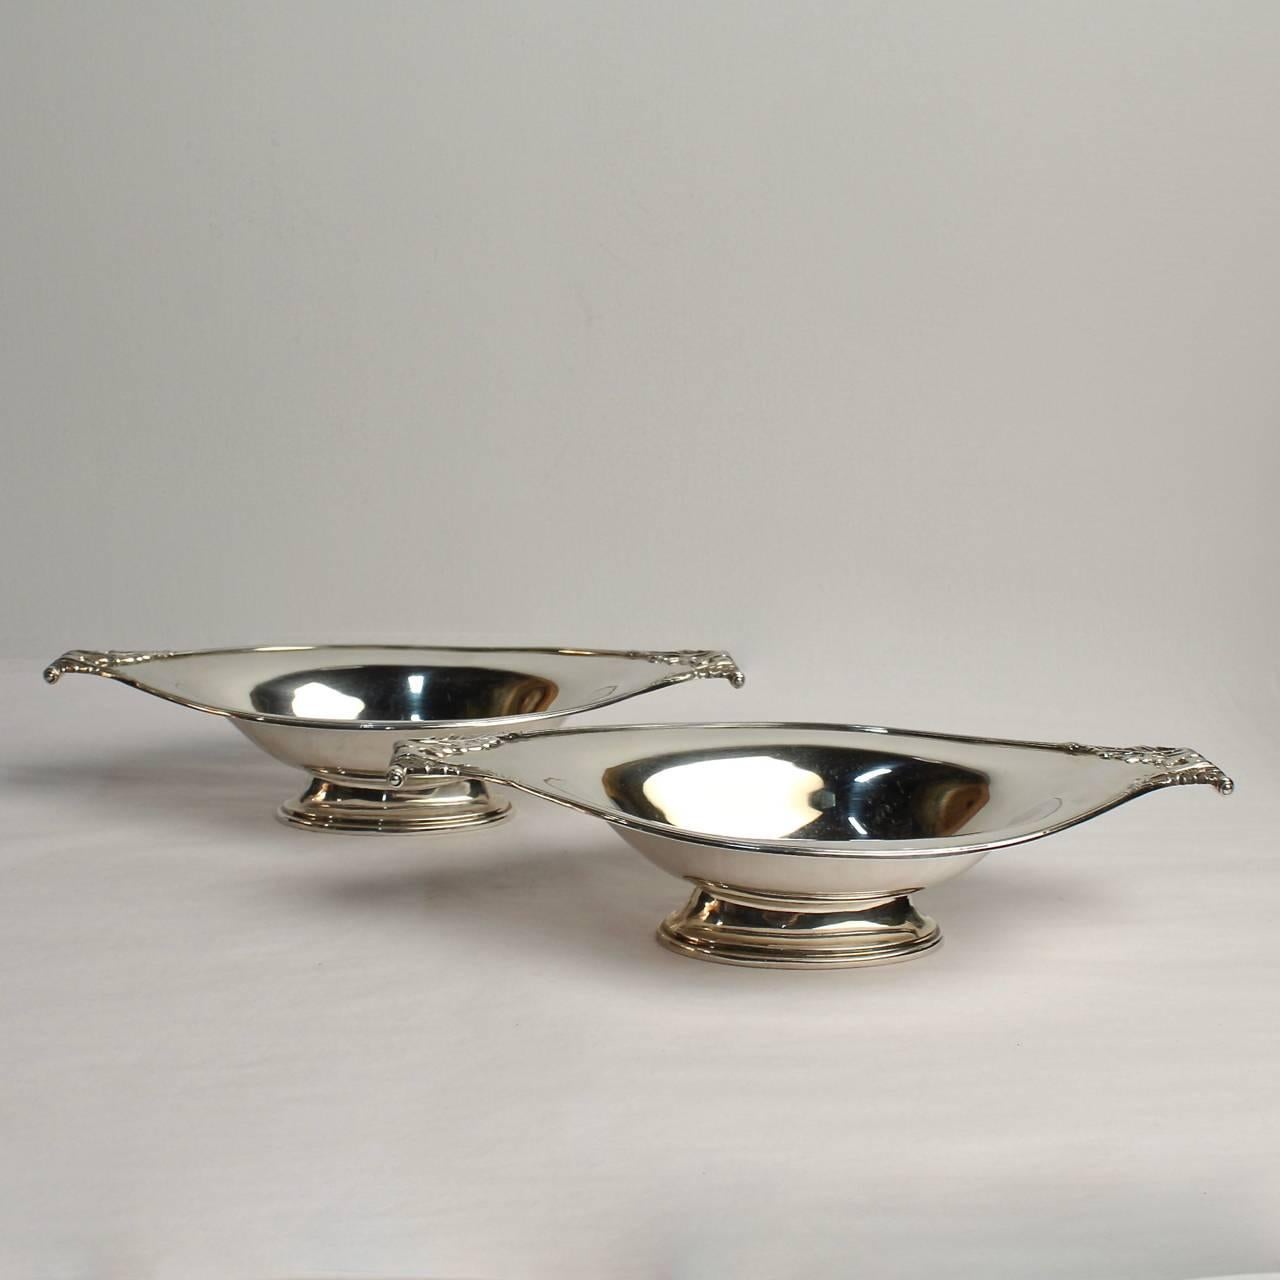 A fine pair of sterling silver scroll handle English sterling silver bowls by Wilson and Sharp. 

Marked for London and 1915.

Wilson & Sharp was the partnership of Robert Wilson and Andrew Sharp and was established in 1889. They ran shops and